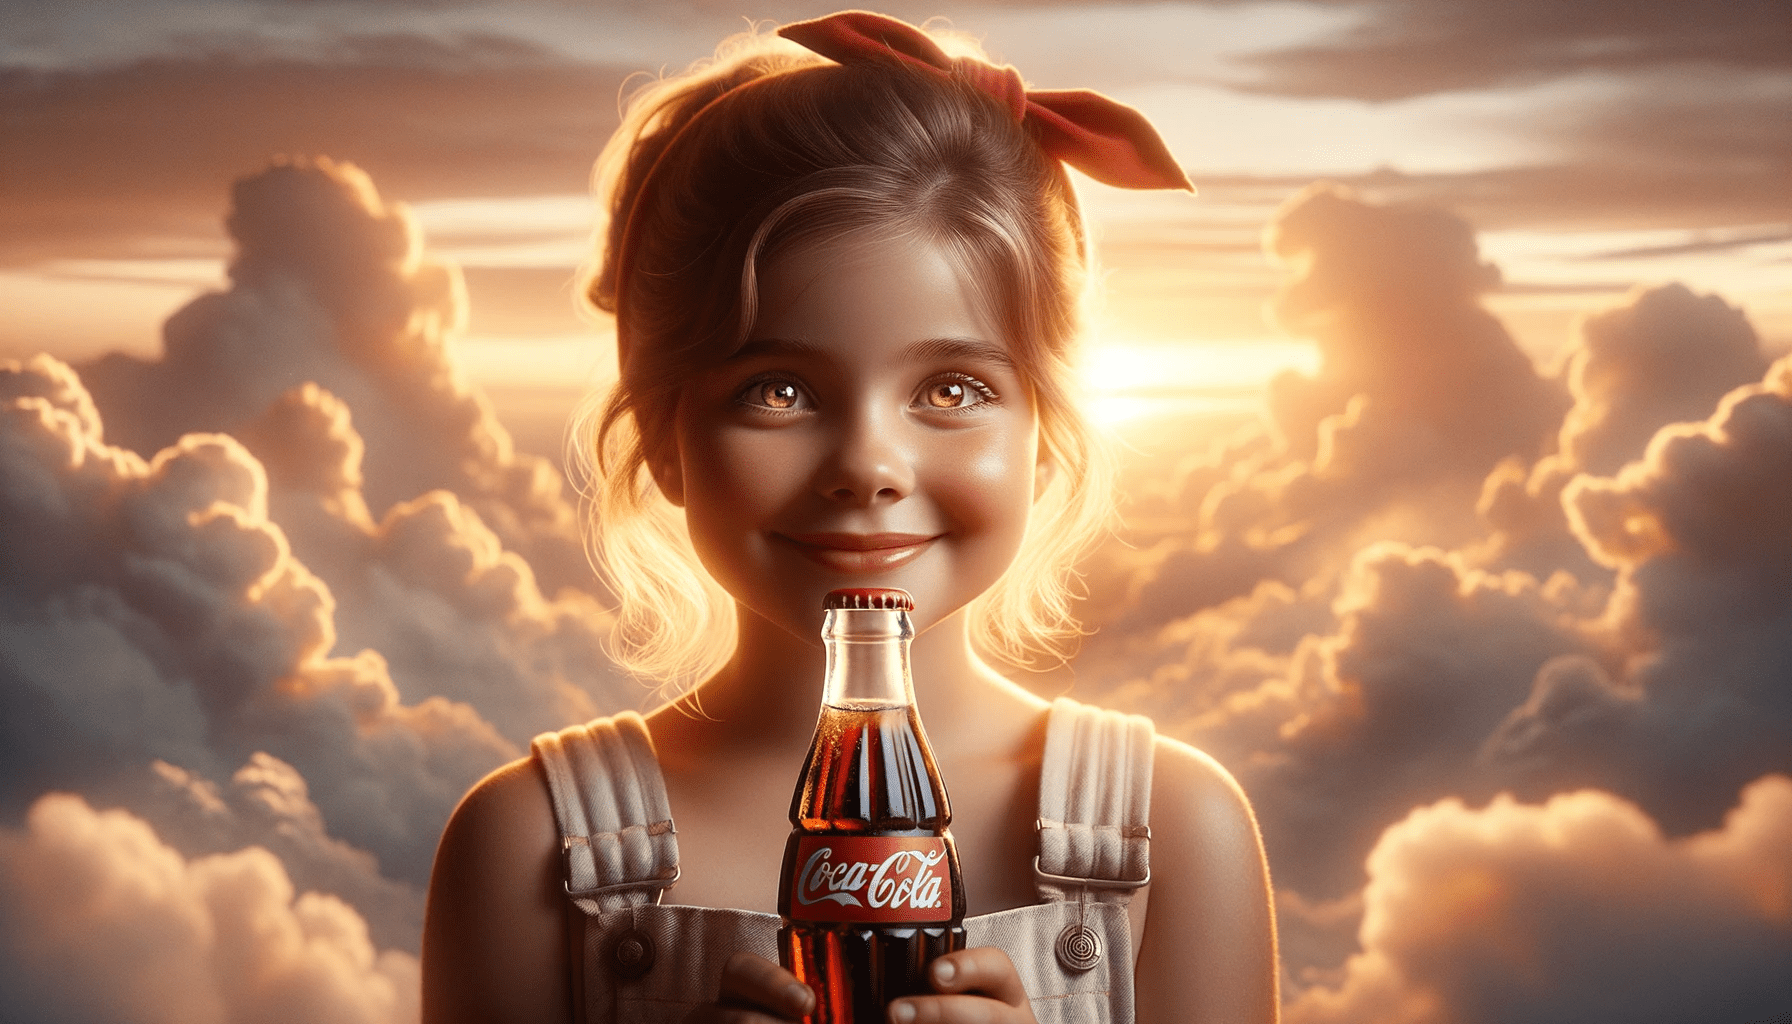 DALL·E 2023-10-25 02.51.02 - 4K ultra-detailed portrait with cinematic lighting of the young innocent girl from the third image, holding a vintage soda bottle, reminiscent of old